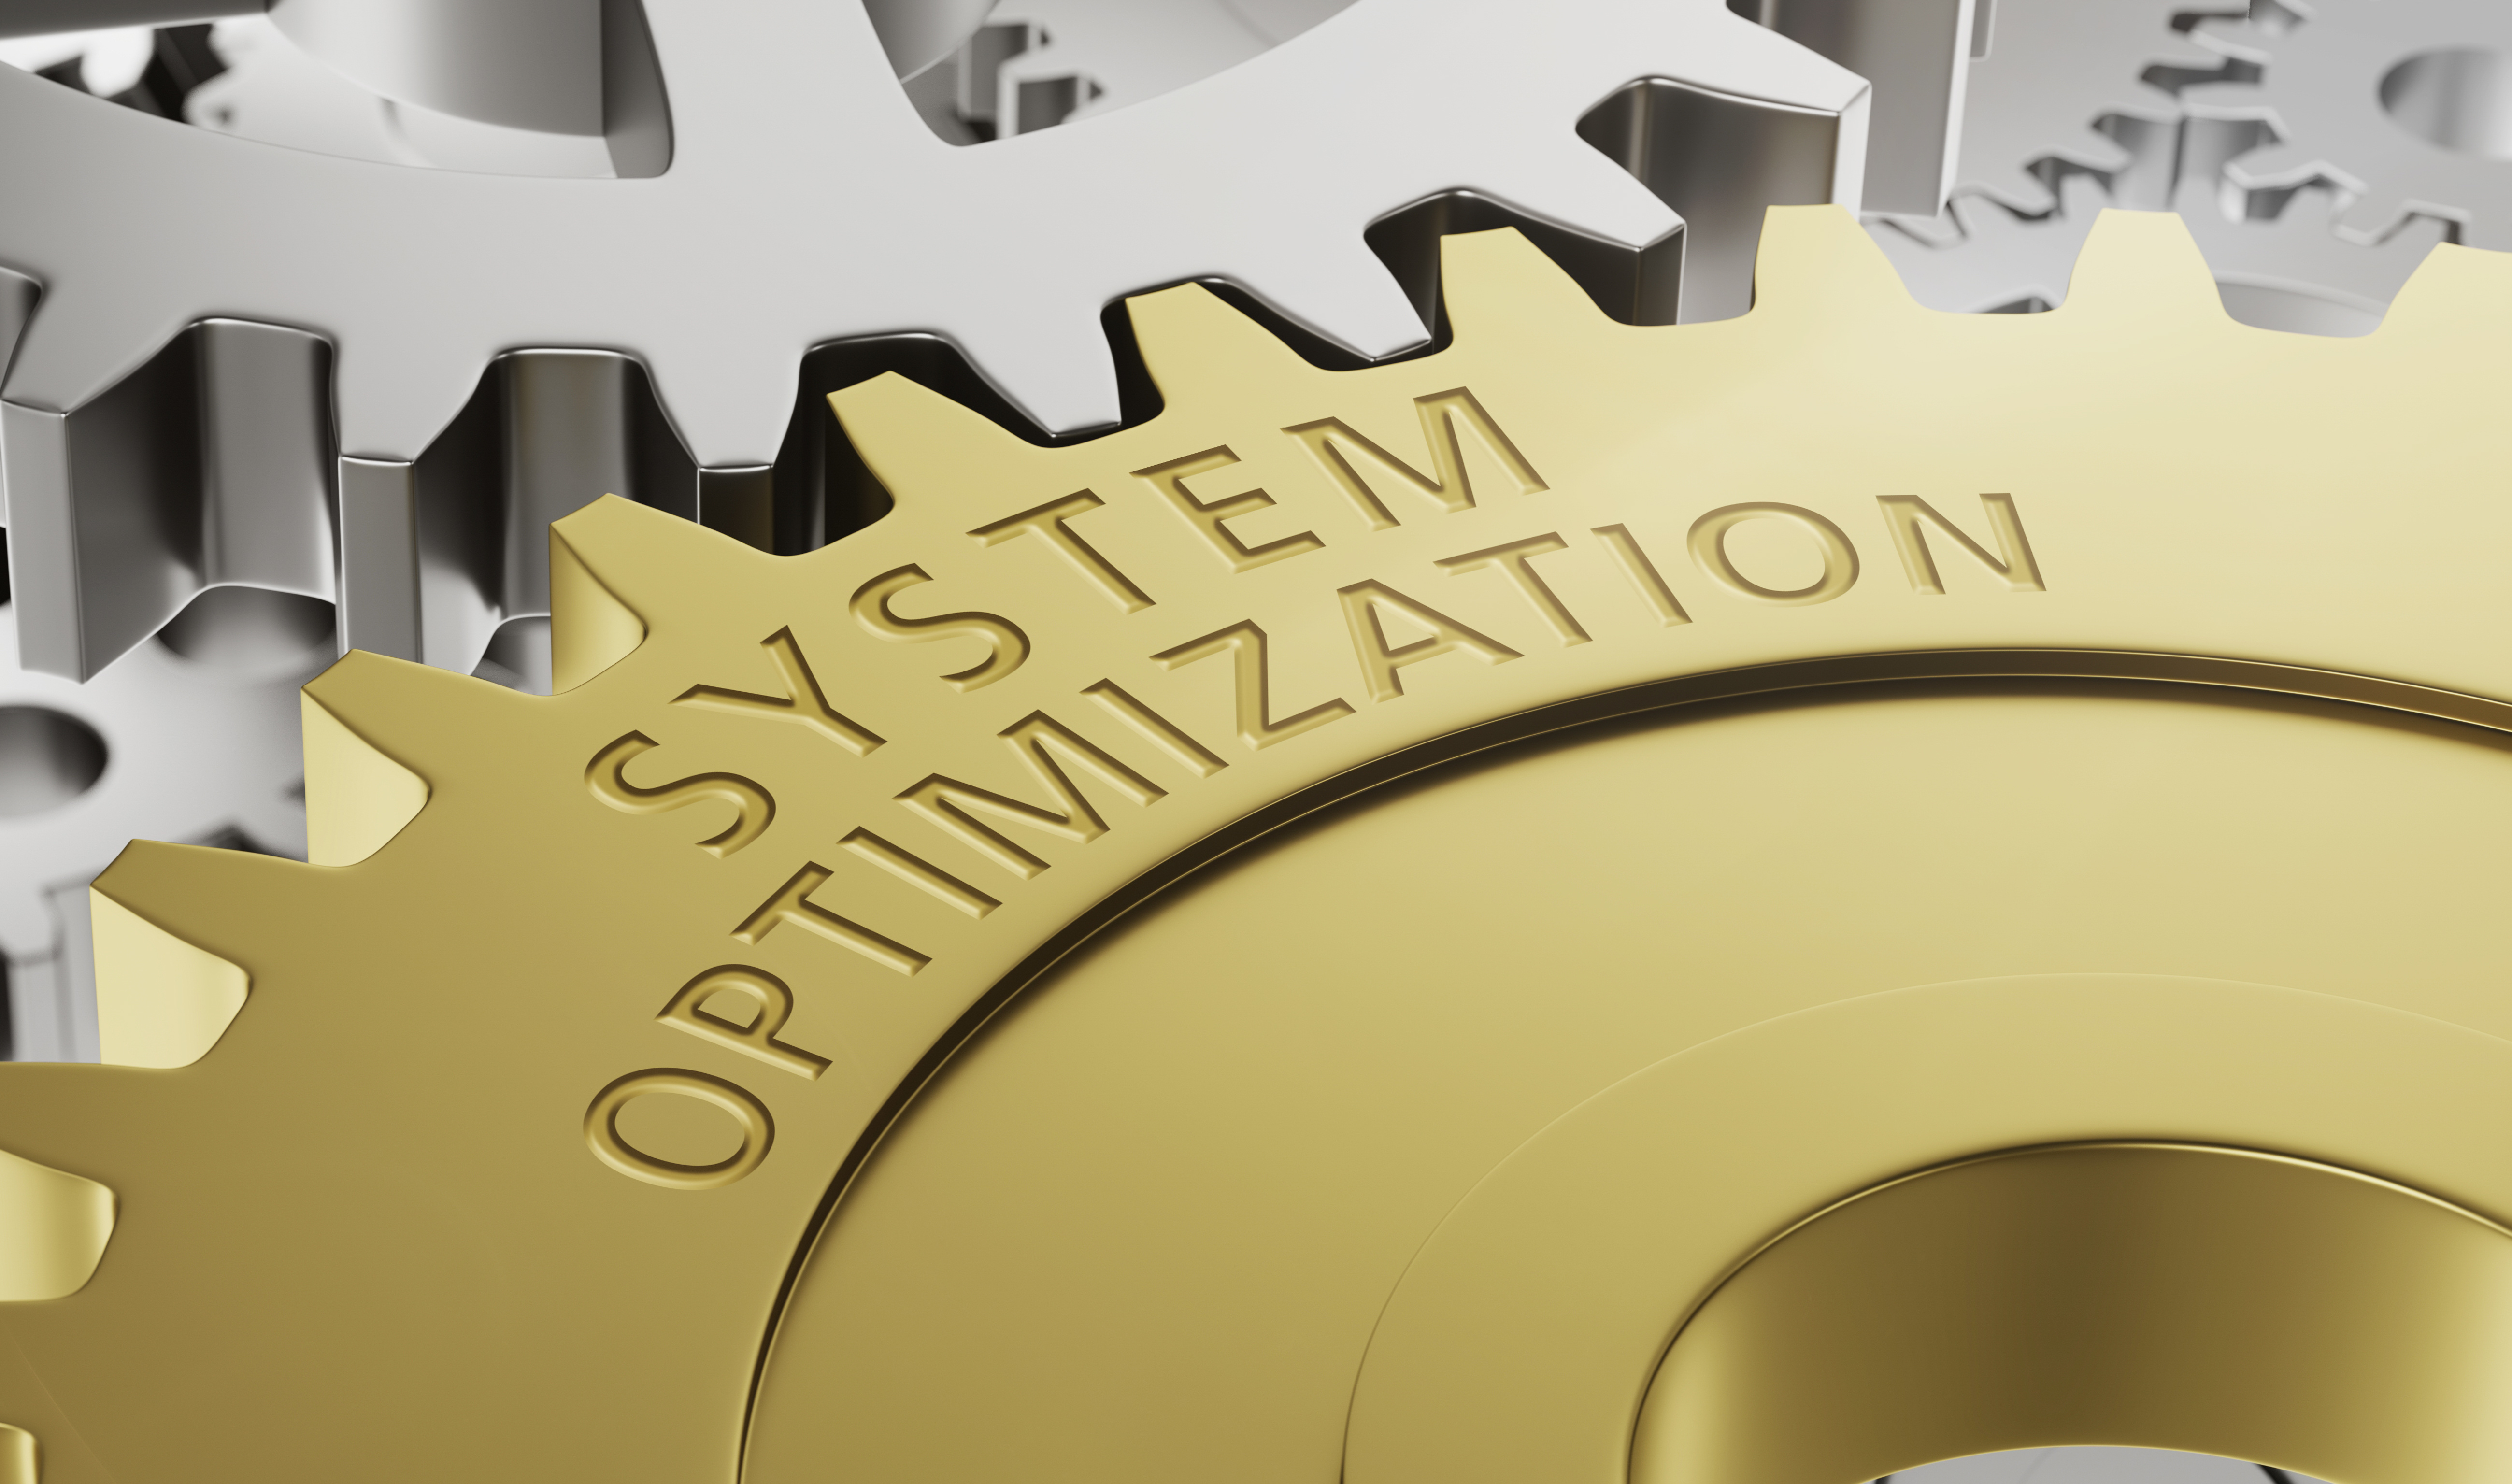 System Optimizers